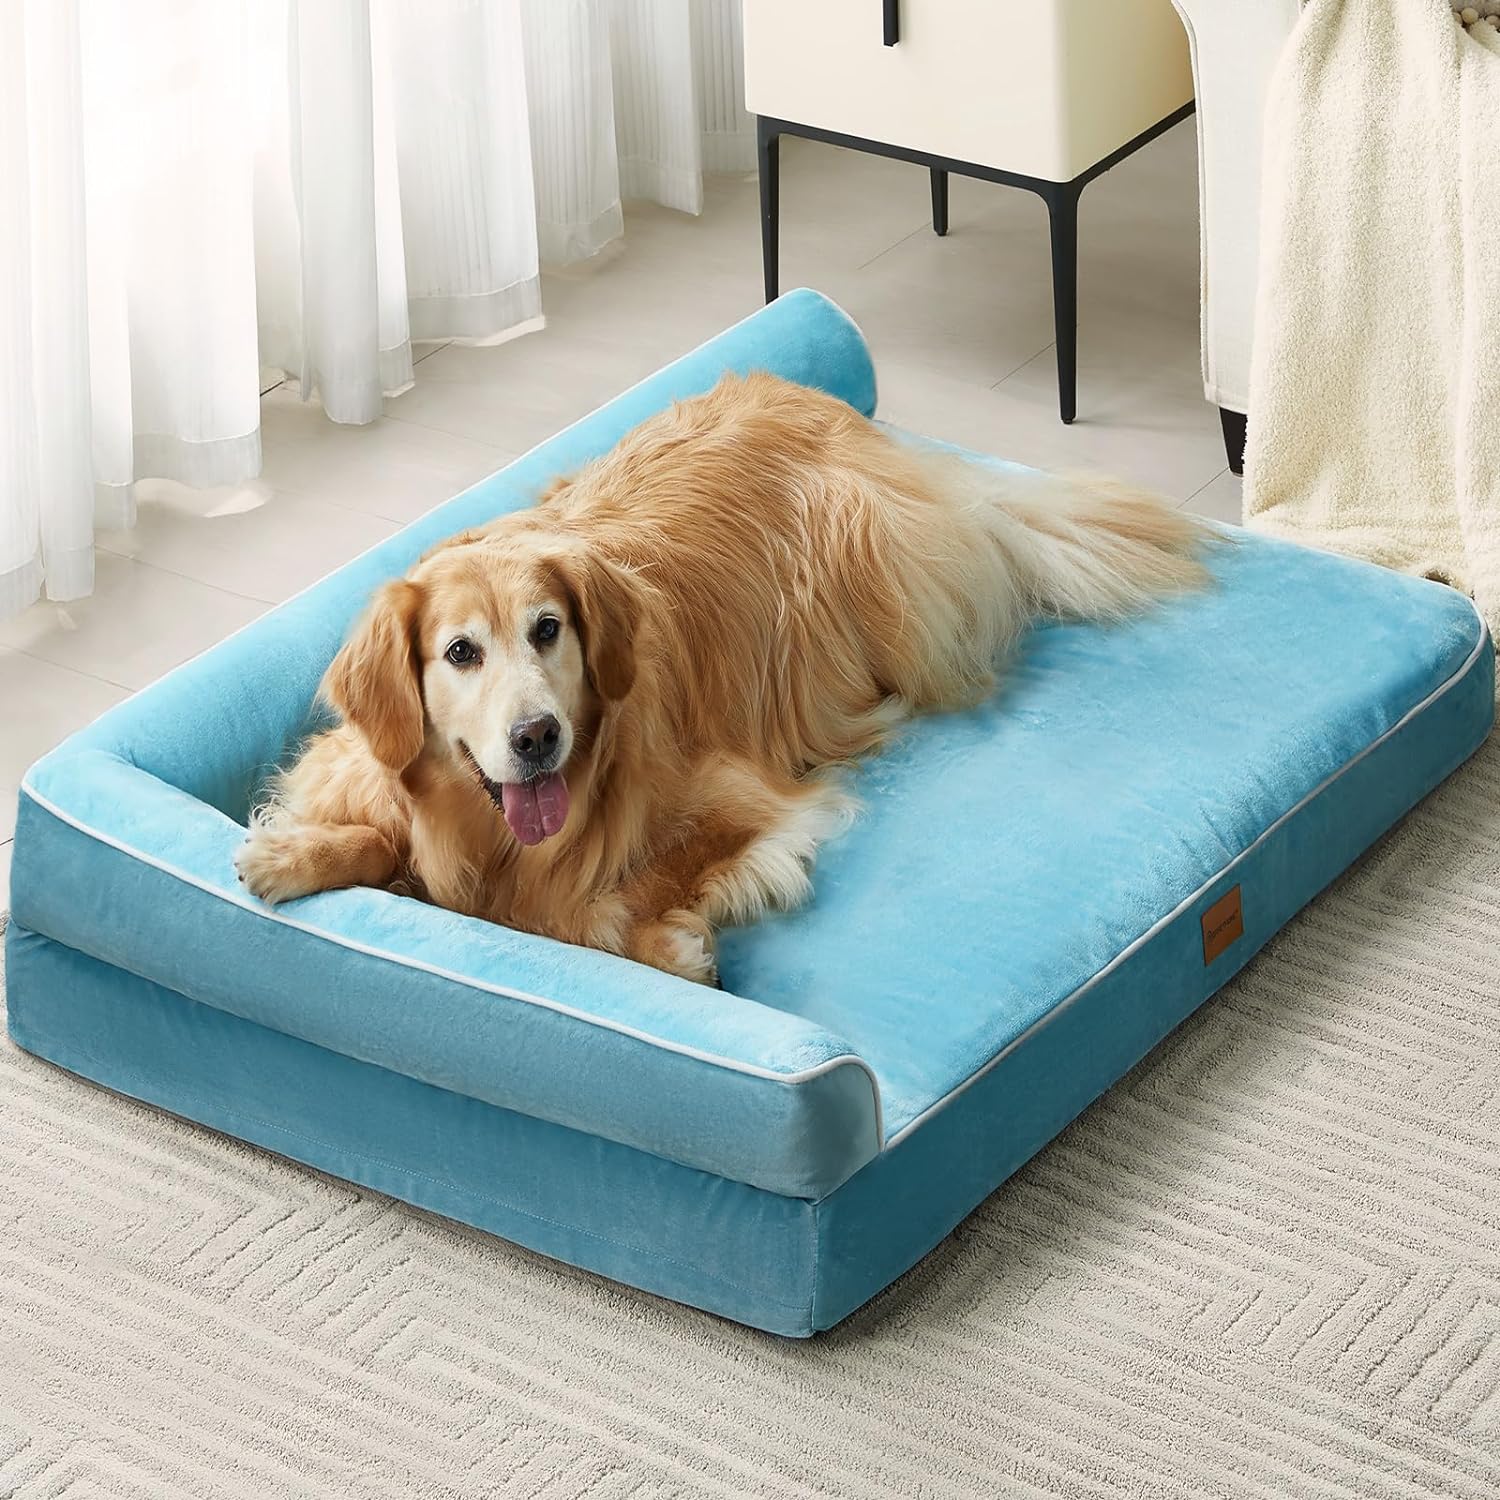 BFPETHOME Orthopedic Dog Beds for Large Dogs - Pet Sofa with Removable Washable Cover, Waterproof Lining and Nonskid Bottom